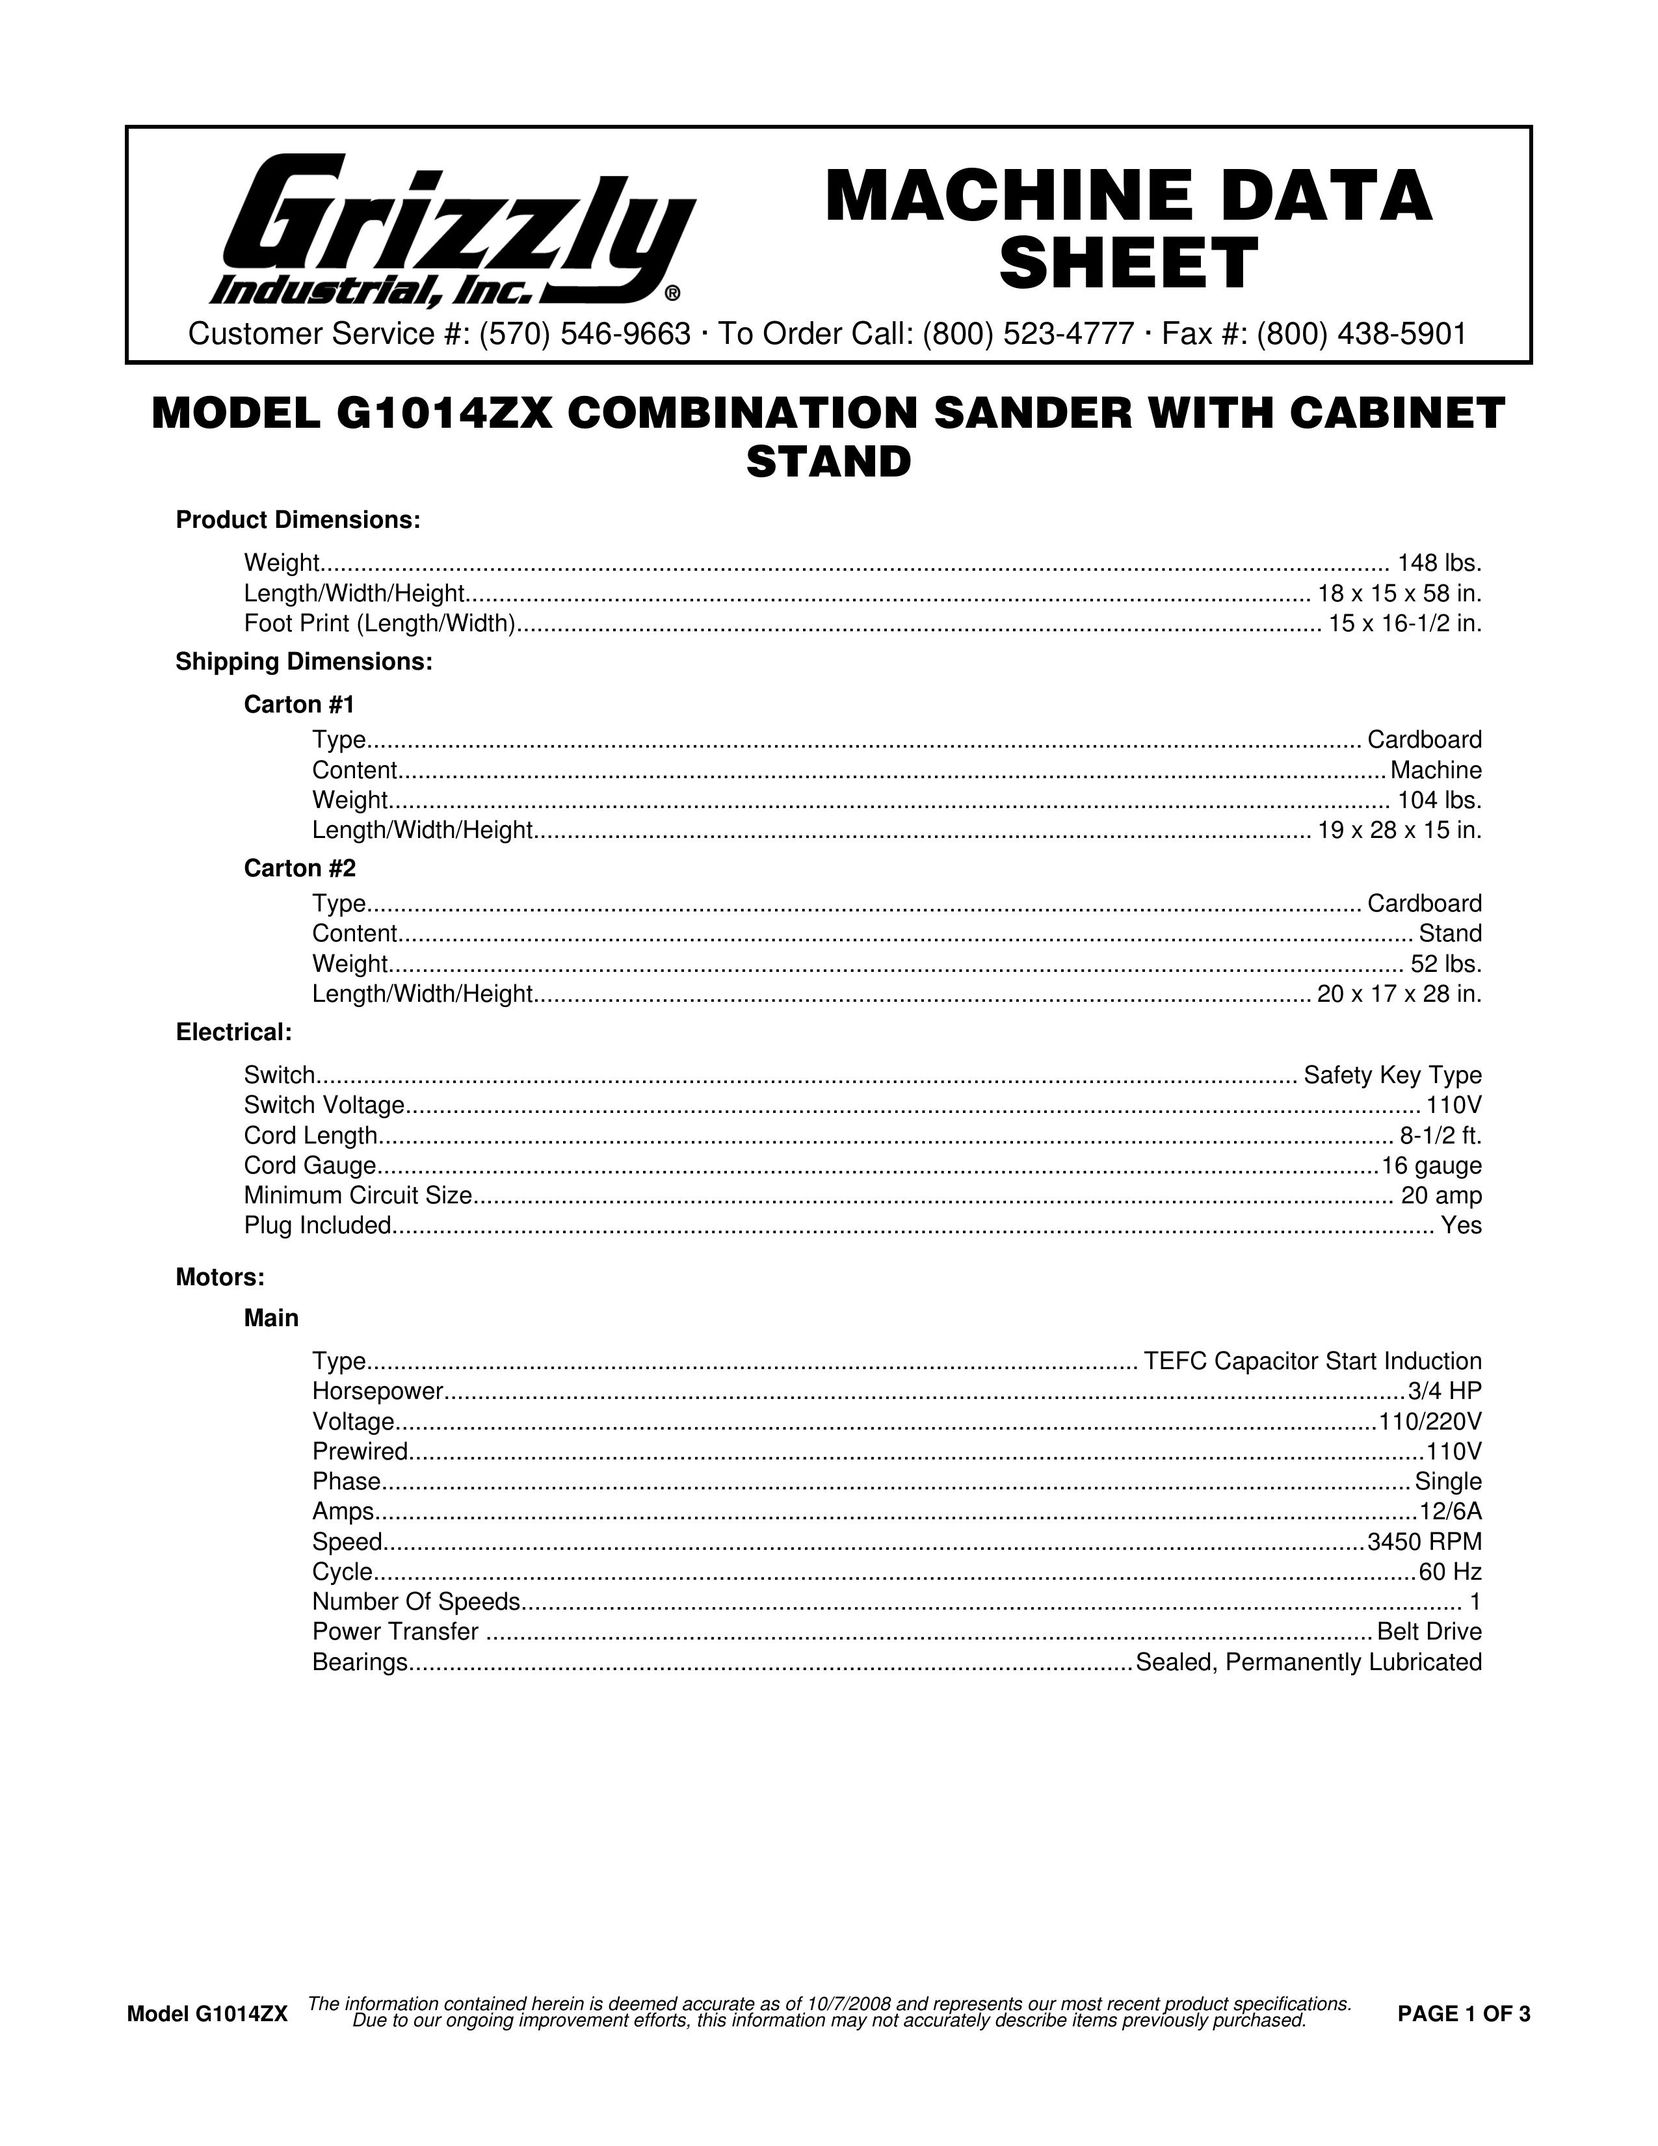 Grizzly G1014ZX Sander User Manual